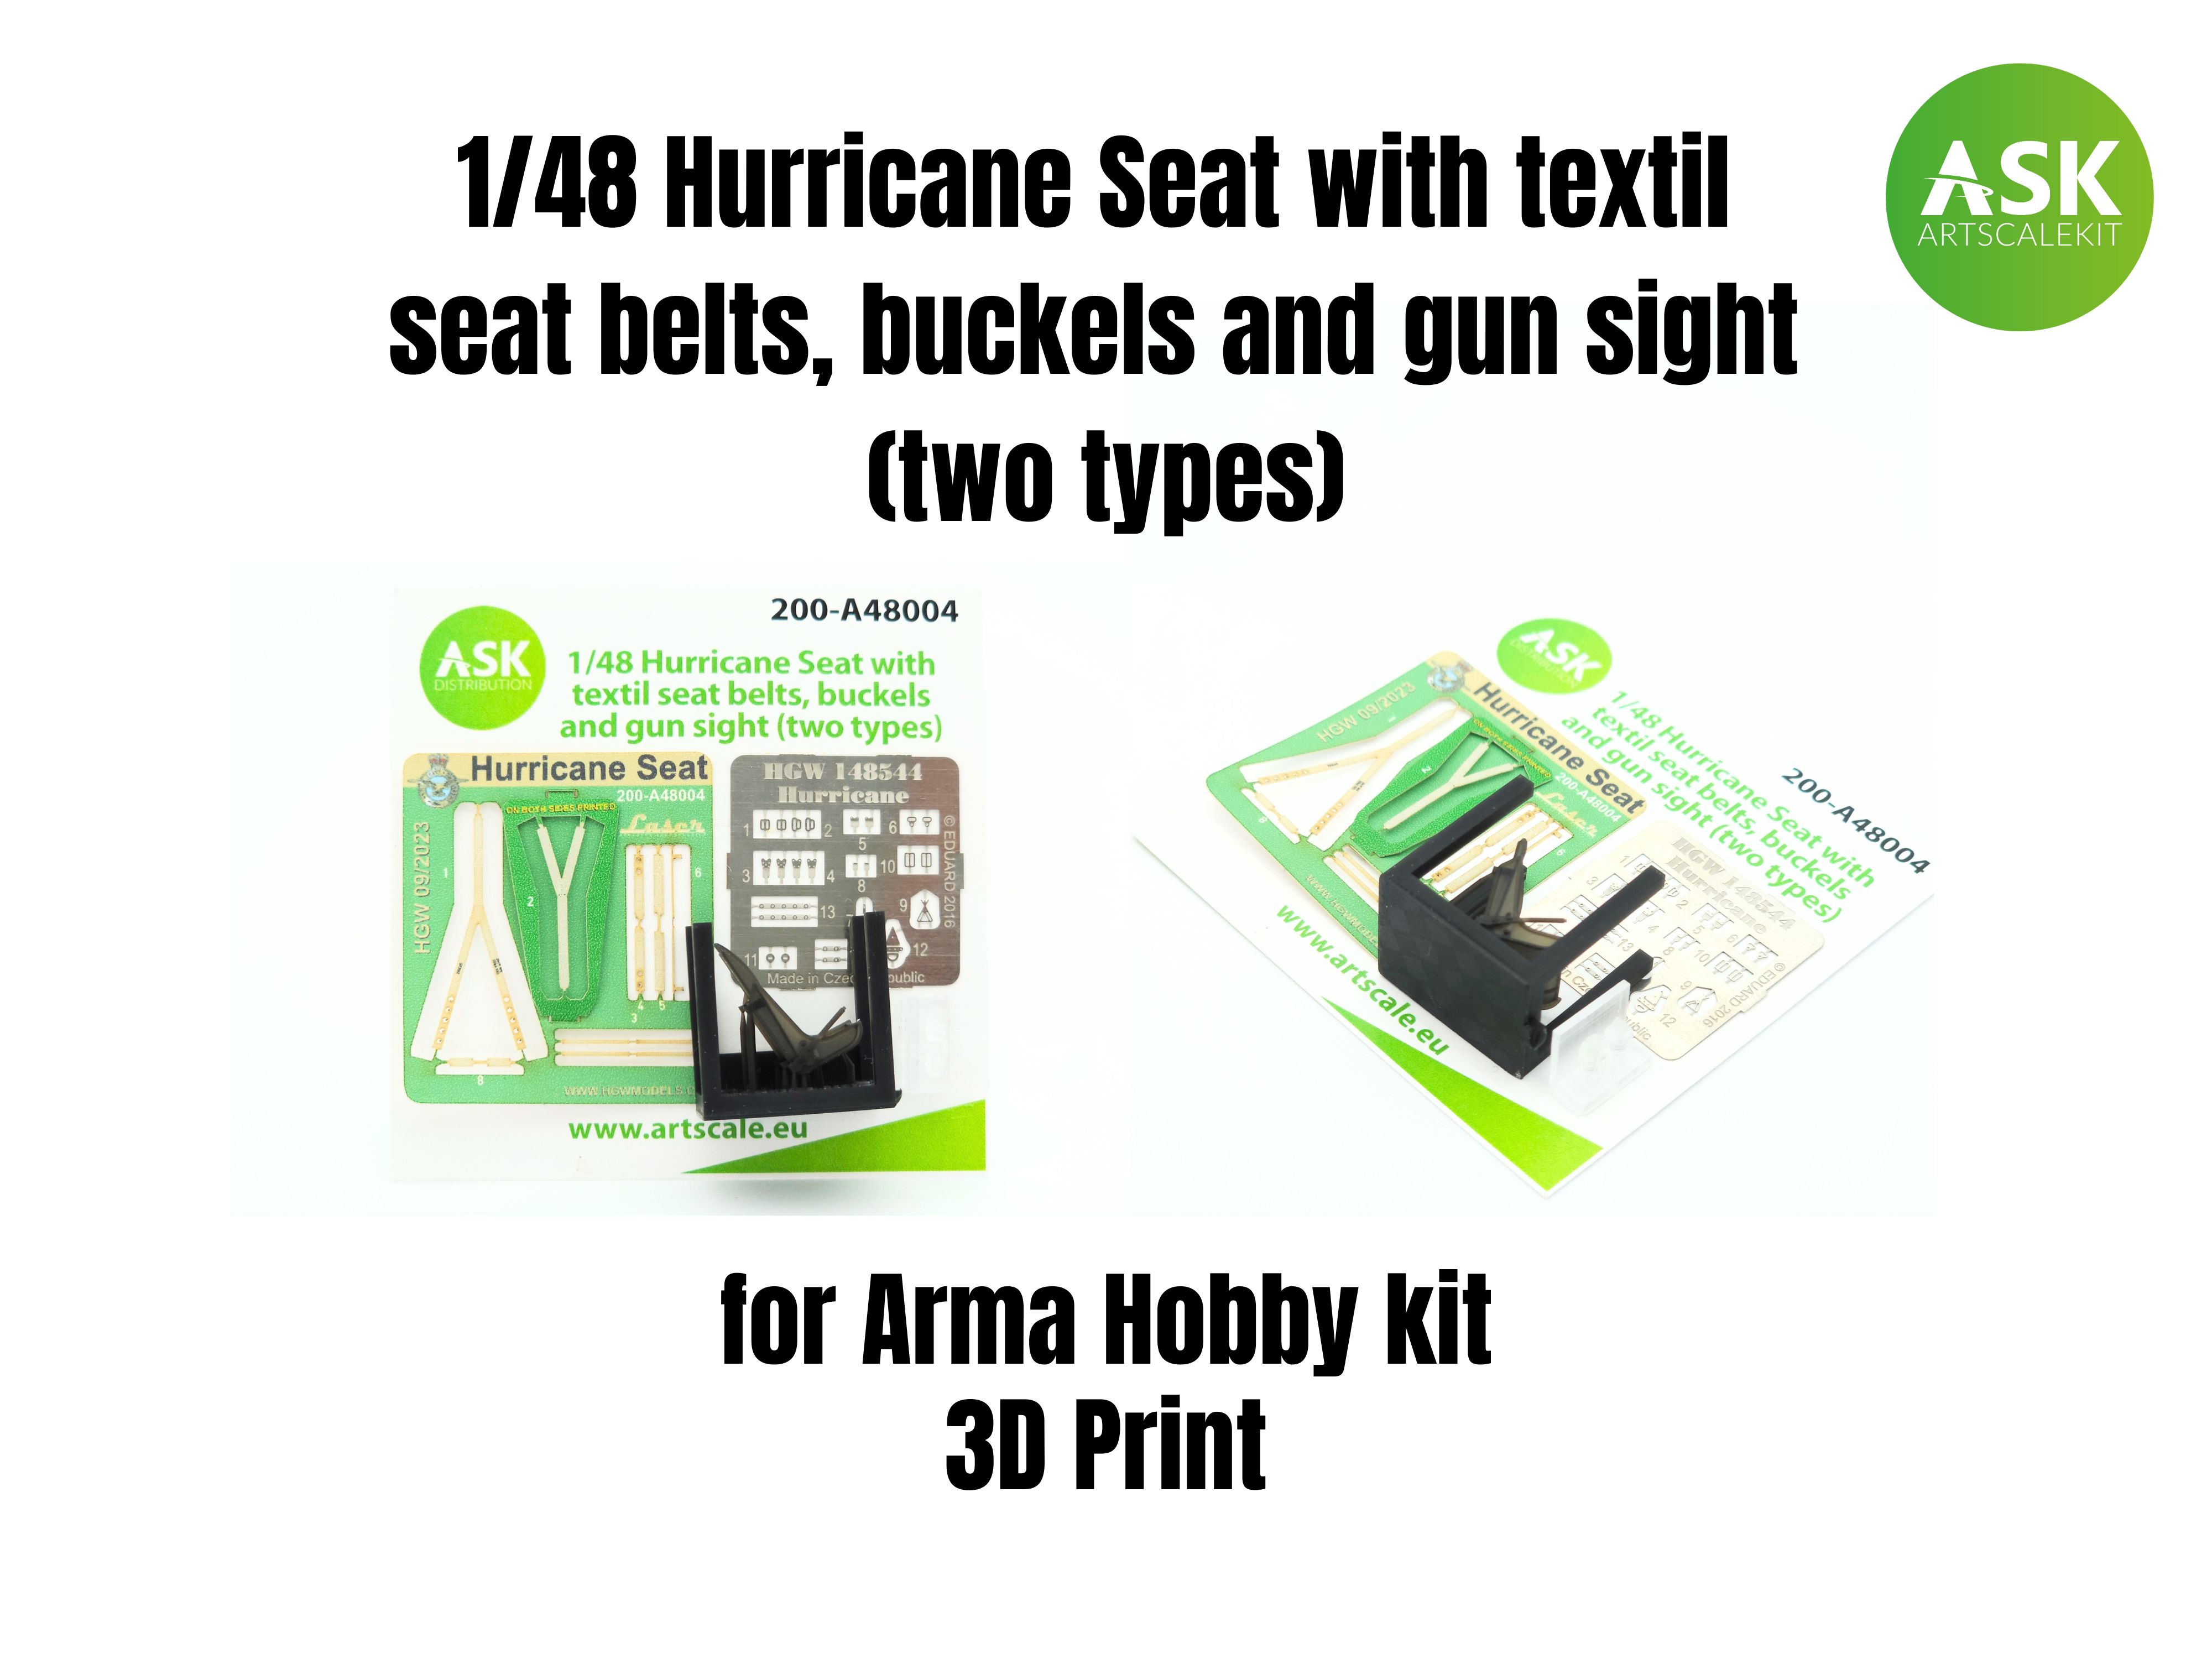 1/48 Hurricane Seat with textil seat belts, buckels and gun sight (two types)